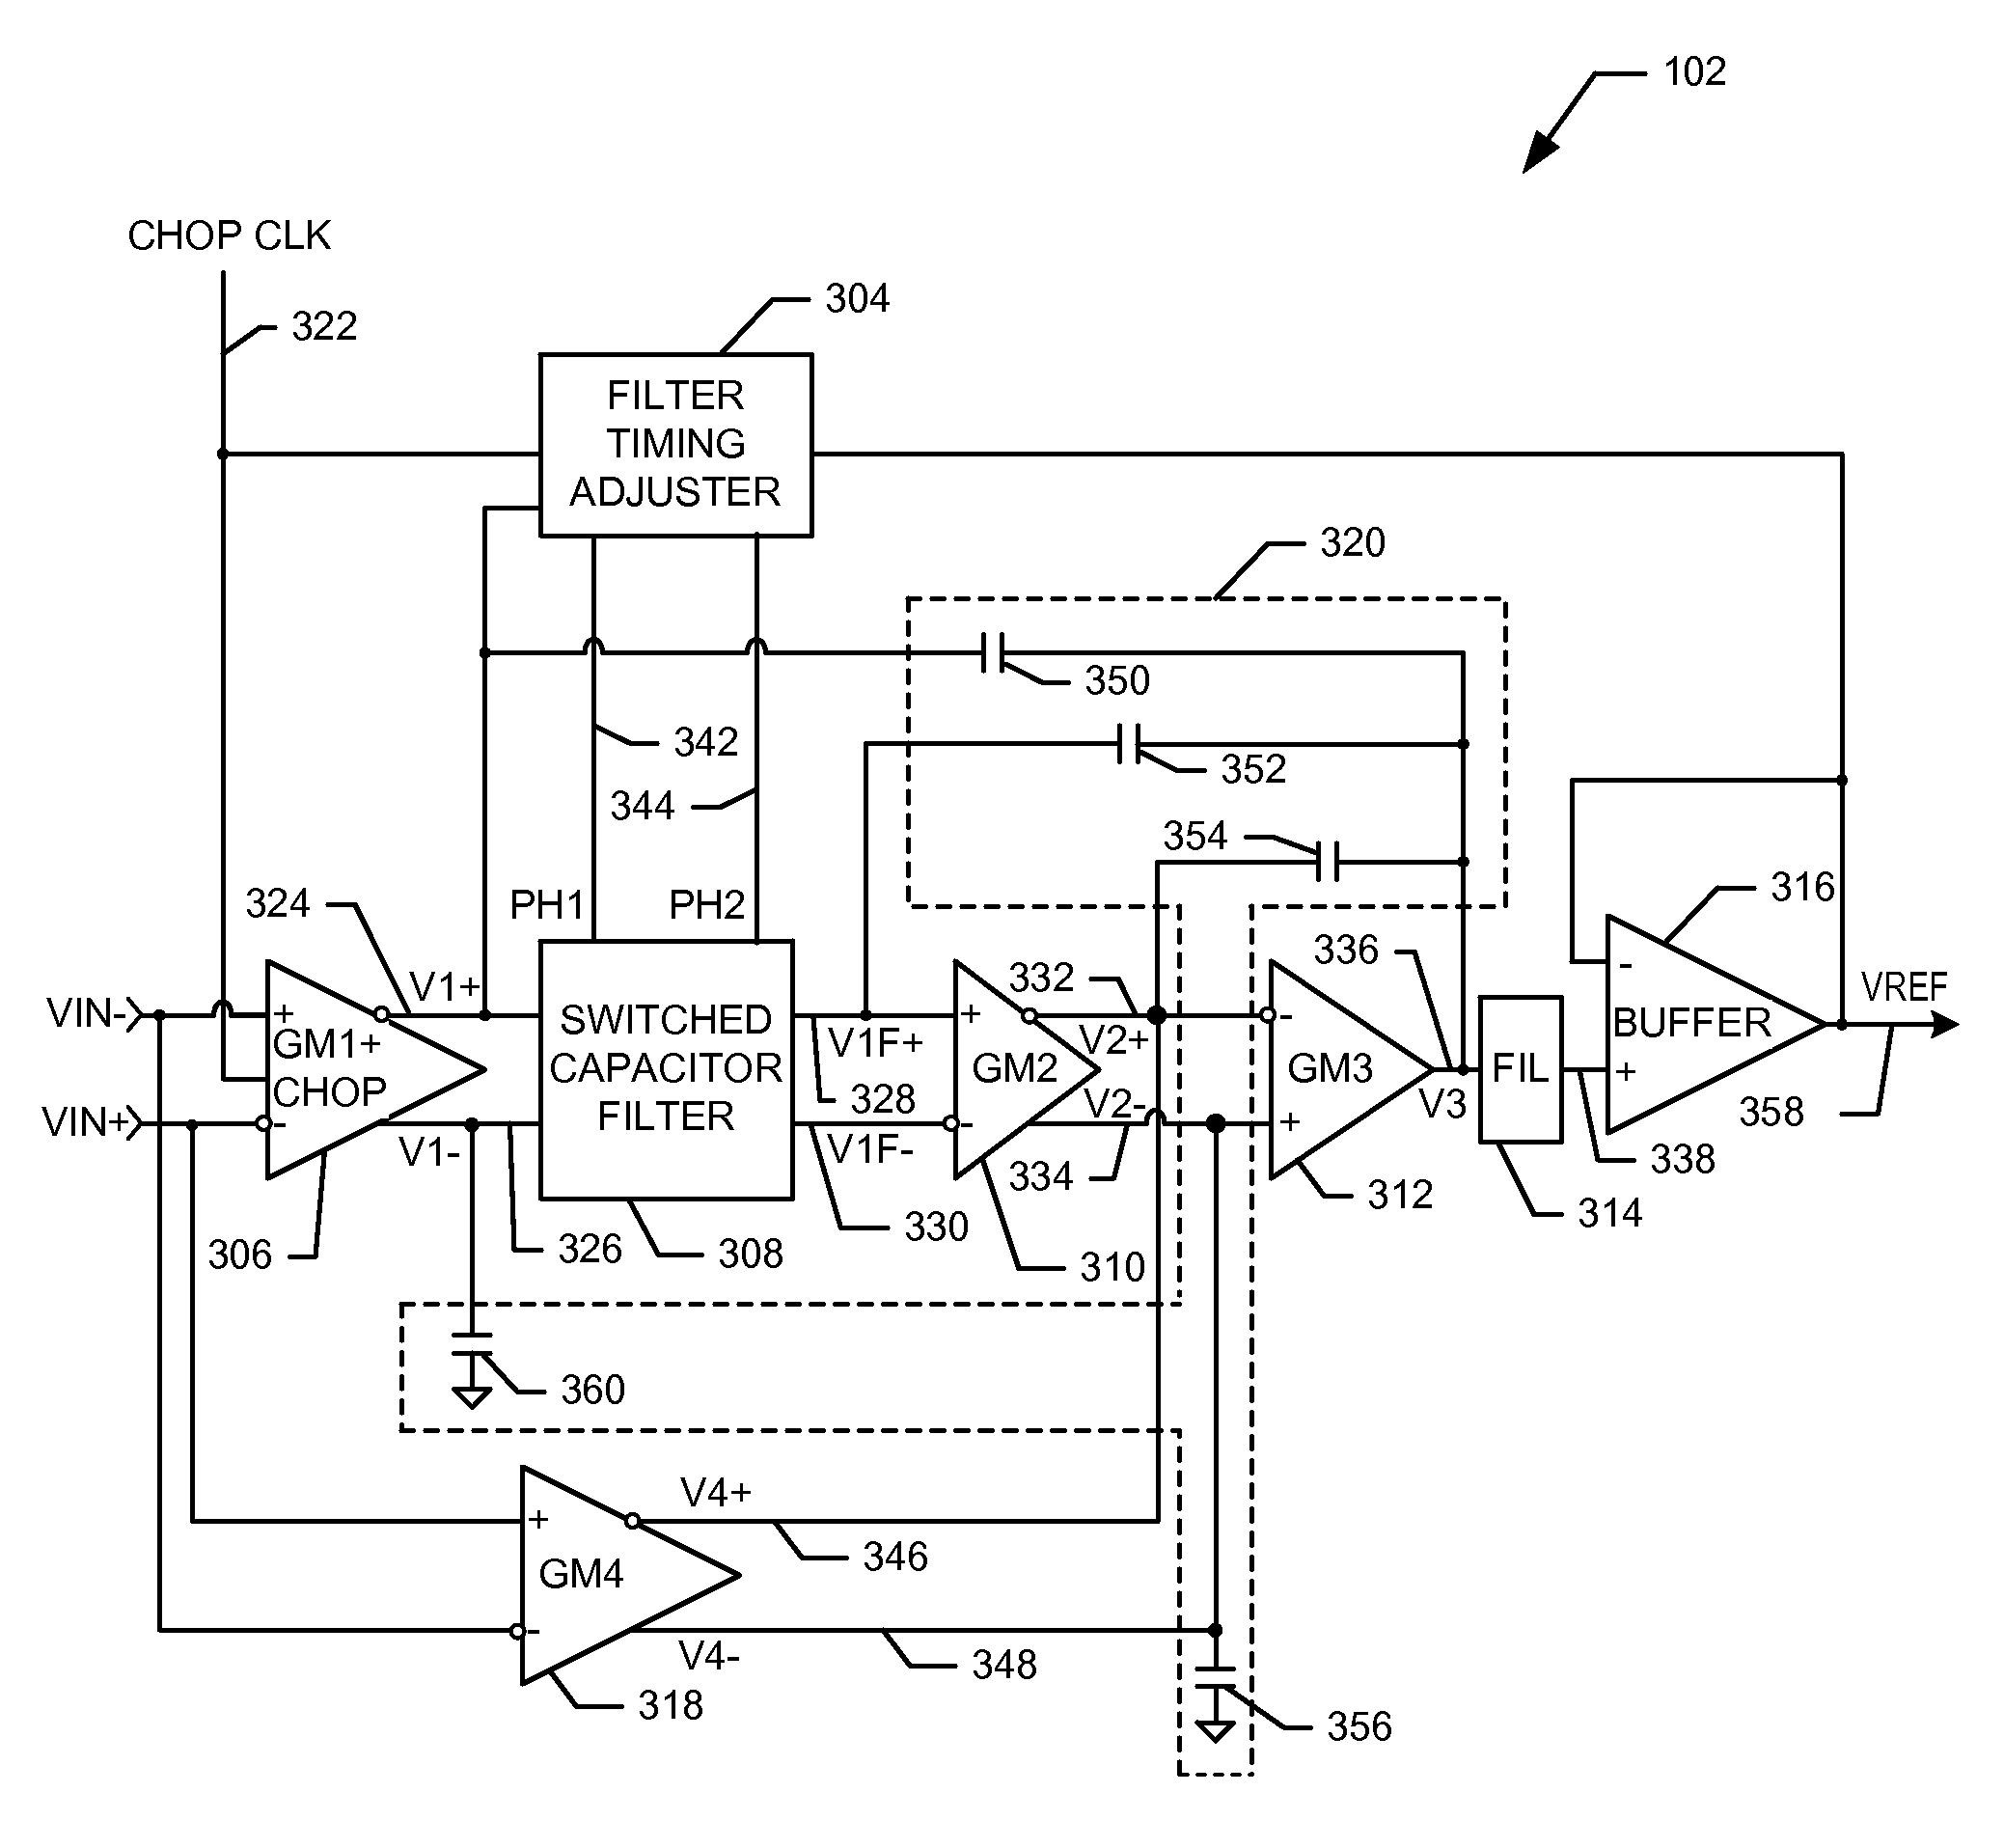 Chopper stabilized amplifier with synchronous switched capacitor noise filtering